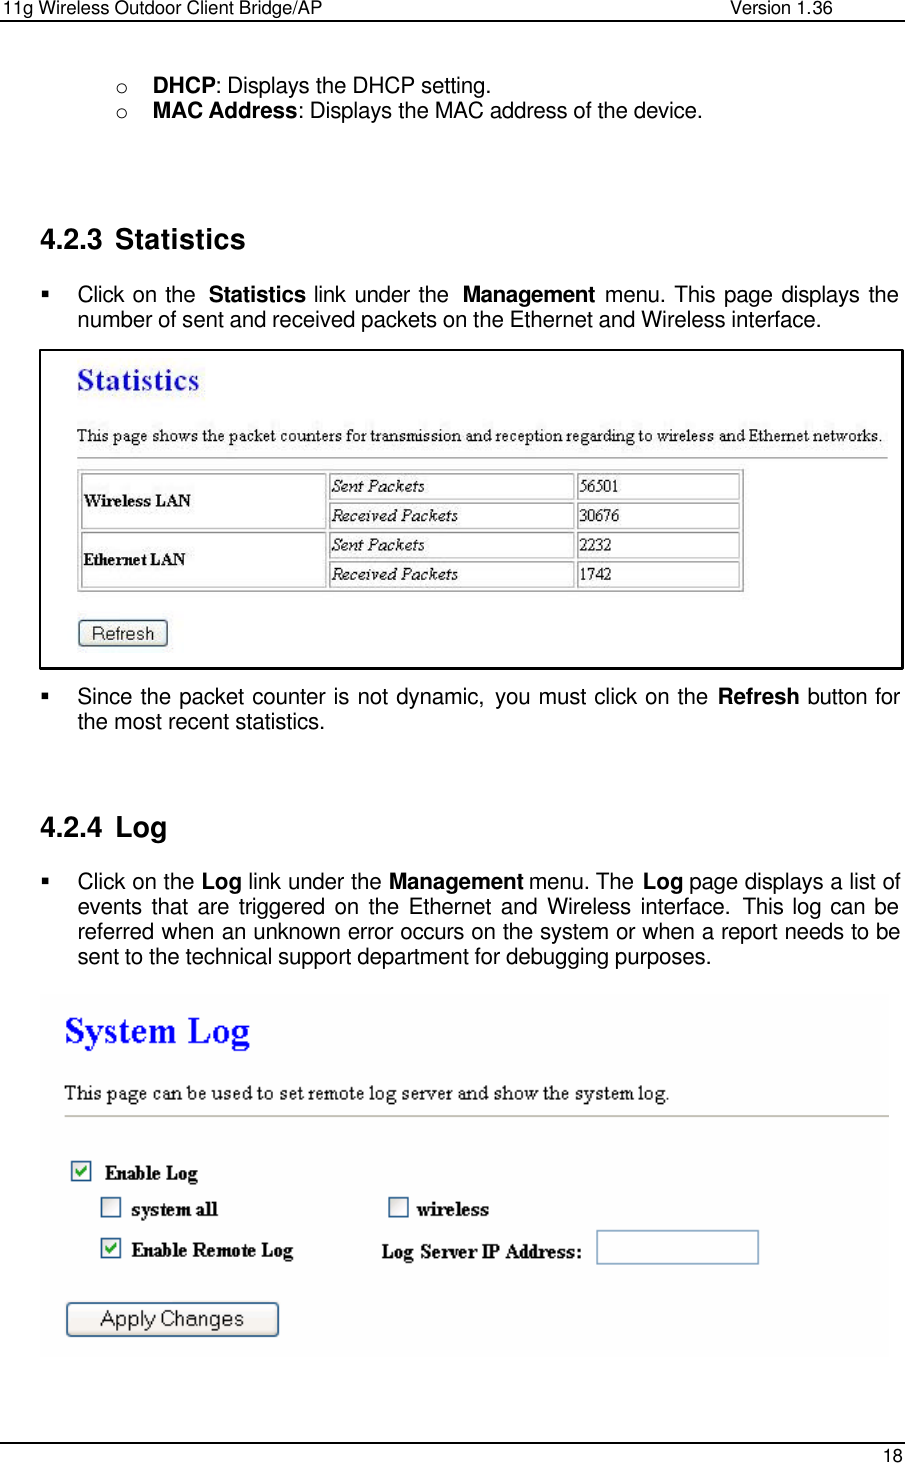 11g Wireless Outdoor Client Bridge/AP                Version 1.36    18  o DHCP: Displays the DHCP setting.  o MAC Address: Displays the MAC address of the device.      4.2.3 Statistics § Click on the  Statistics link under the  Management menu. This page displays the number of sent and received packets on the Ethernet and Wireless interface.                § Since the packet counter is not dynamic, you must click on the Refresh button for the most recent statistics.     4.2.4 Log § Click on the Log link under the Management menu. The Log page displays a list of events that are triggered on the Ethernet and Wireless interface. This log can be referred when an unknown error occurs on the system or when a report needs to be sent to the technical support department for debugging purposes.       